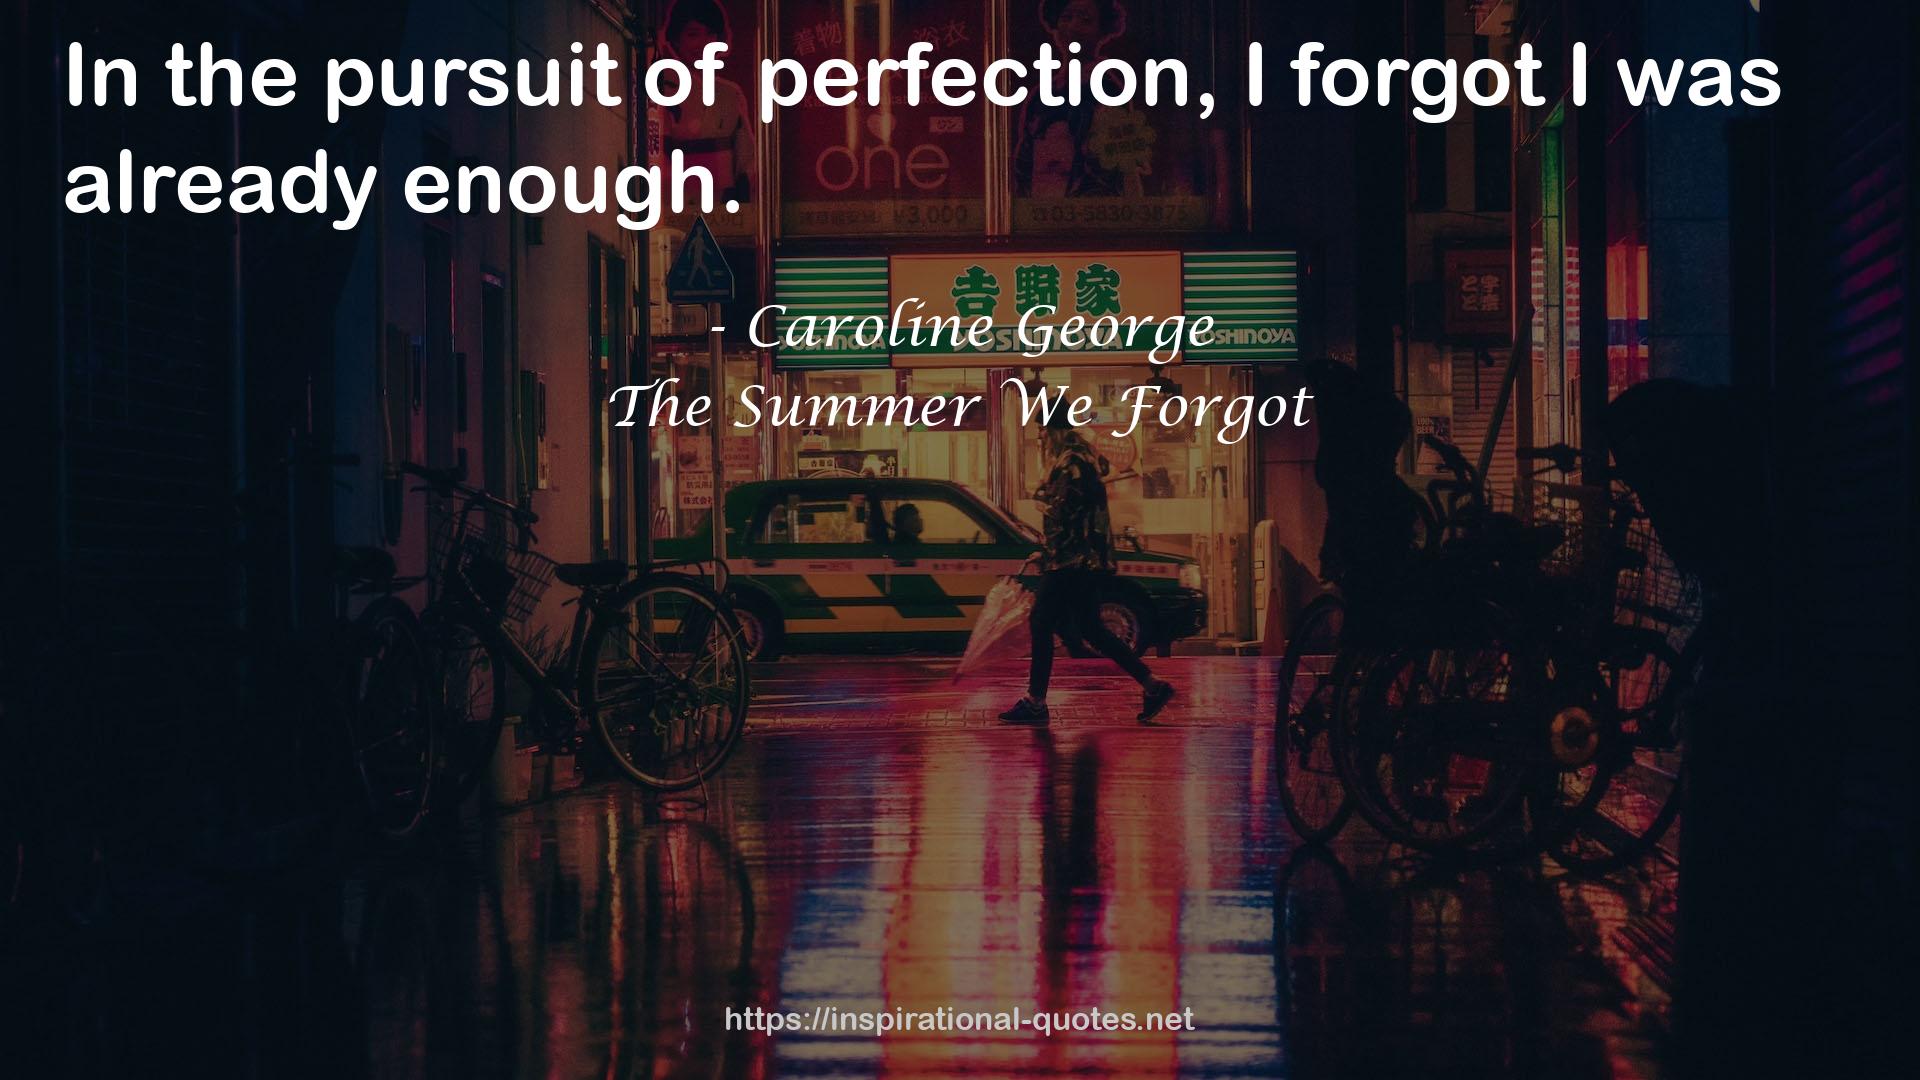 The Summer We Forgot QUOTES